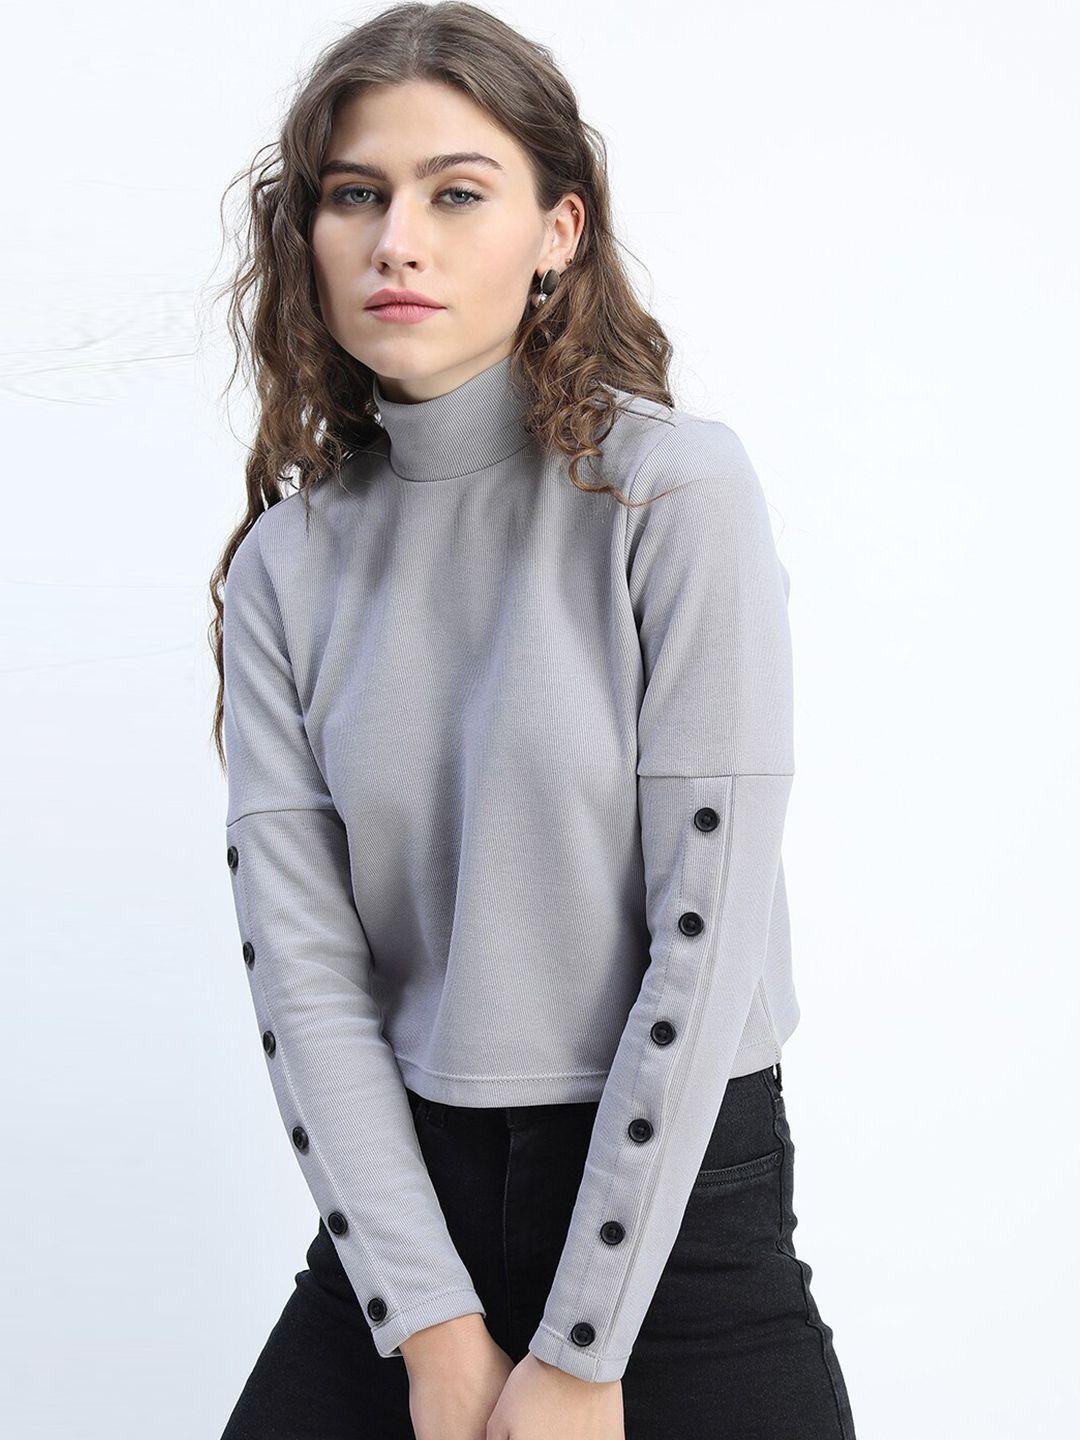 tokyo-talkies-grey-knitted-high-neck-top